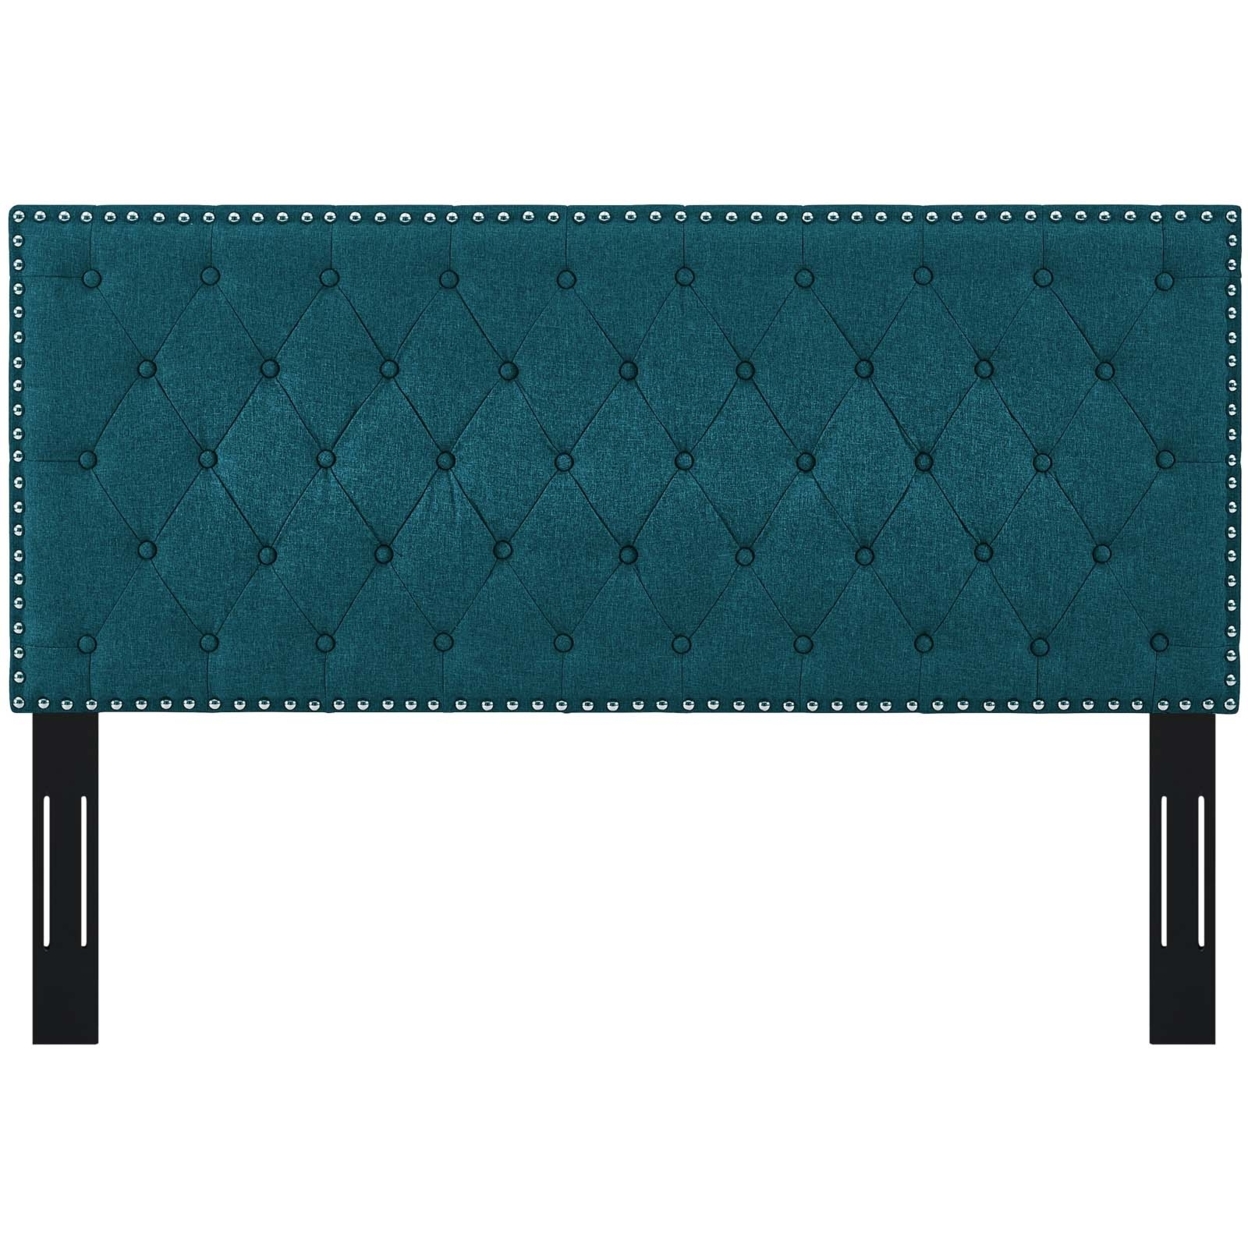 Helena Tufted King And California King Upholstered Linen Fabric Headboard, Teal